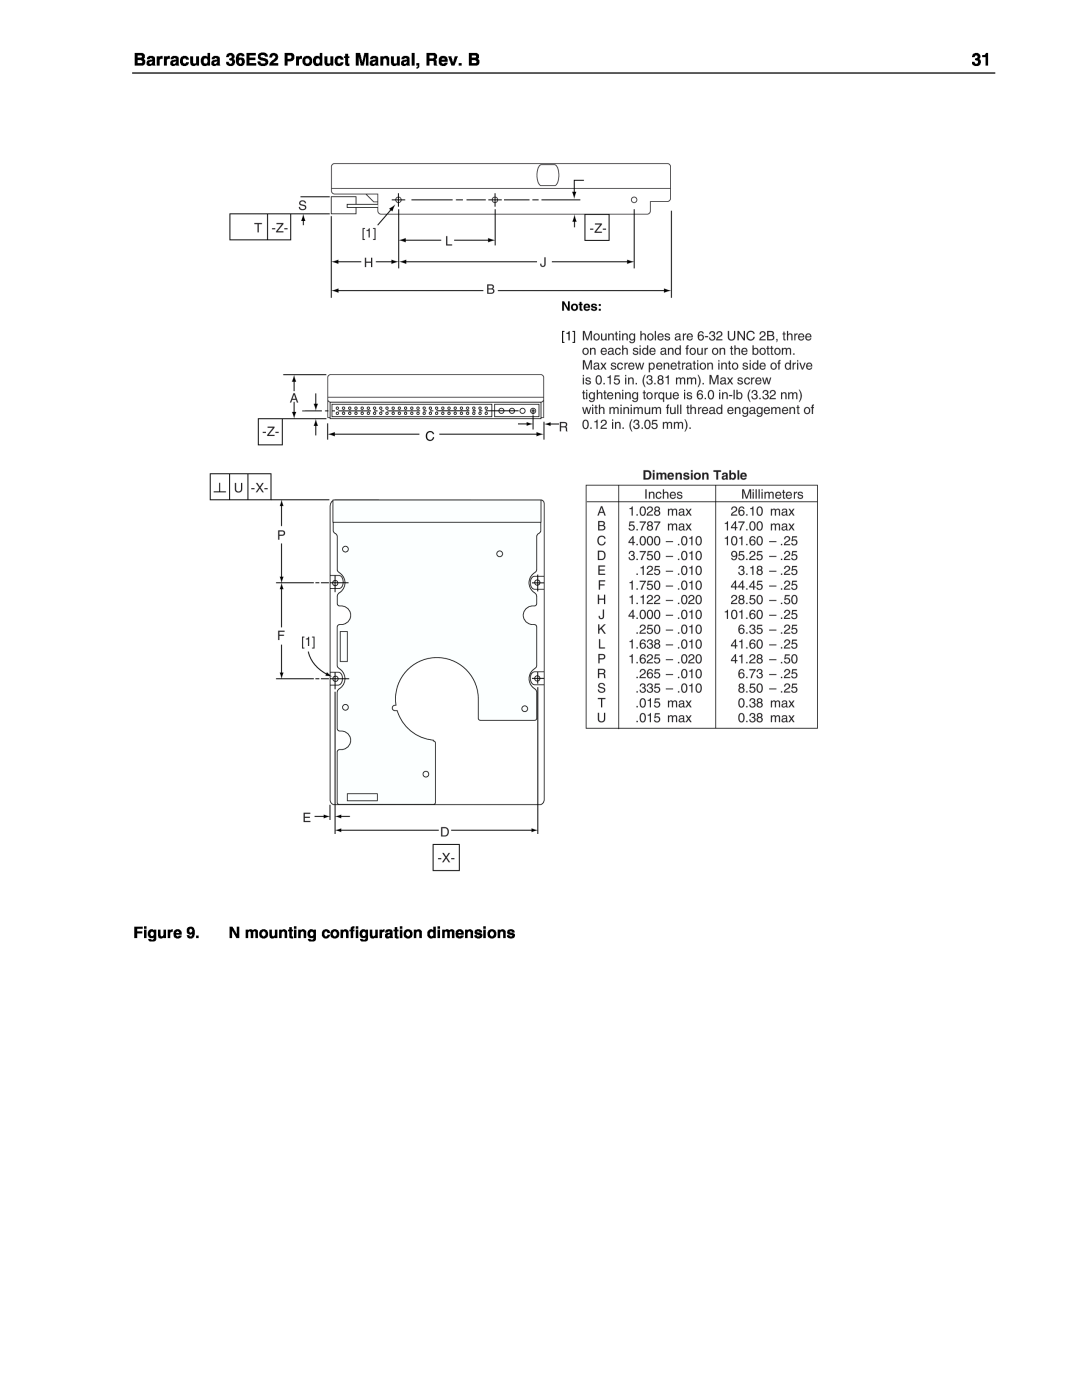 Seagate ST318438LW, ST318418N Barracuda 36ES2 Product Manual, Rev. B, N mounting configuration dimensions, Dimension Table 